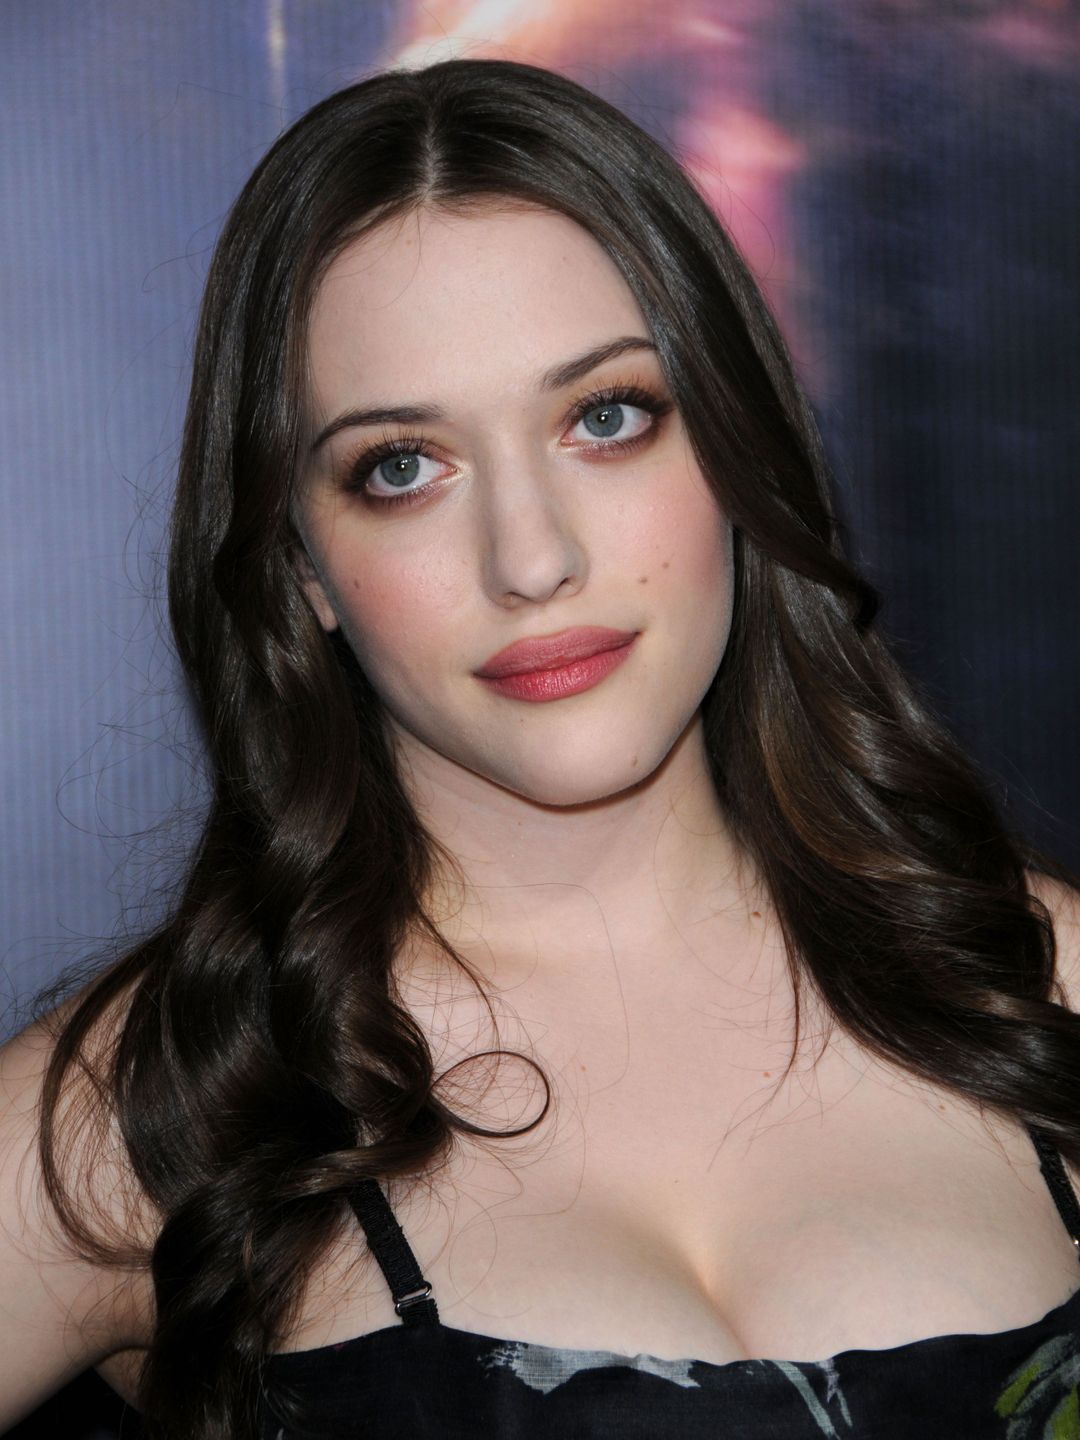 Kat Dennings young age